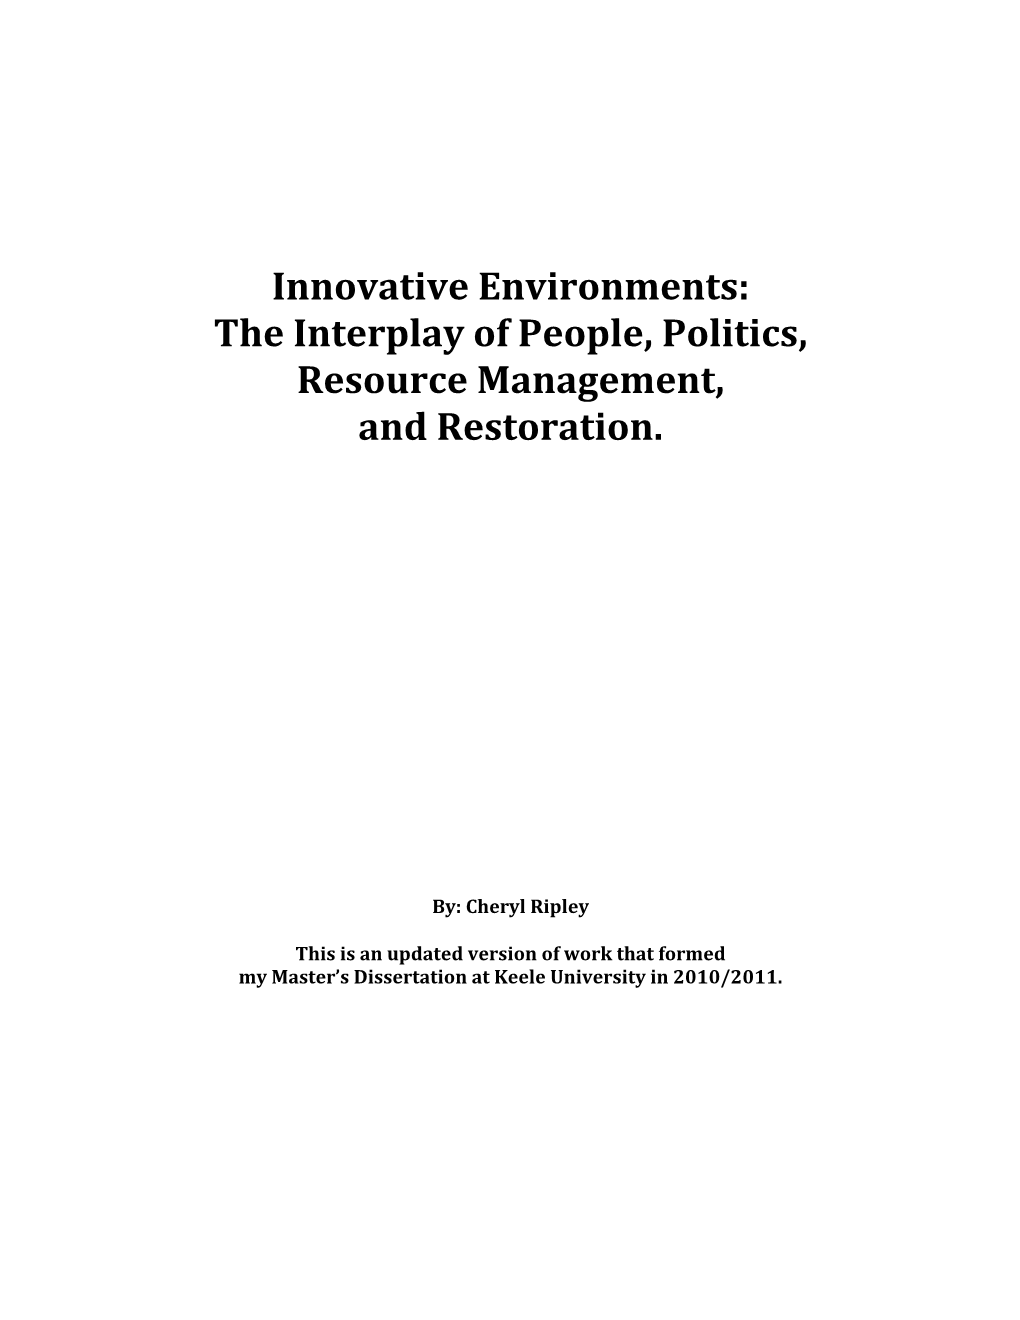 The Interplay of People, Politics, Resource Management, and Restoration